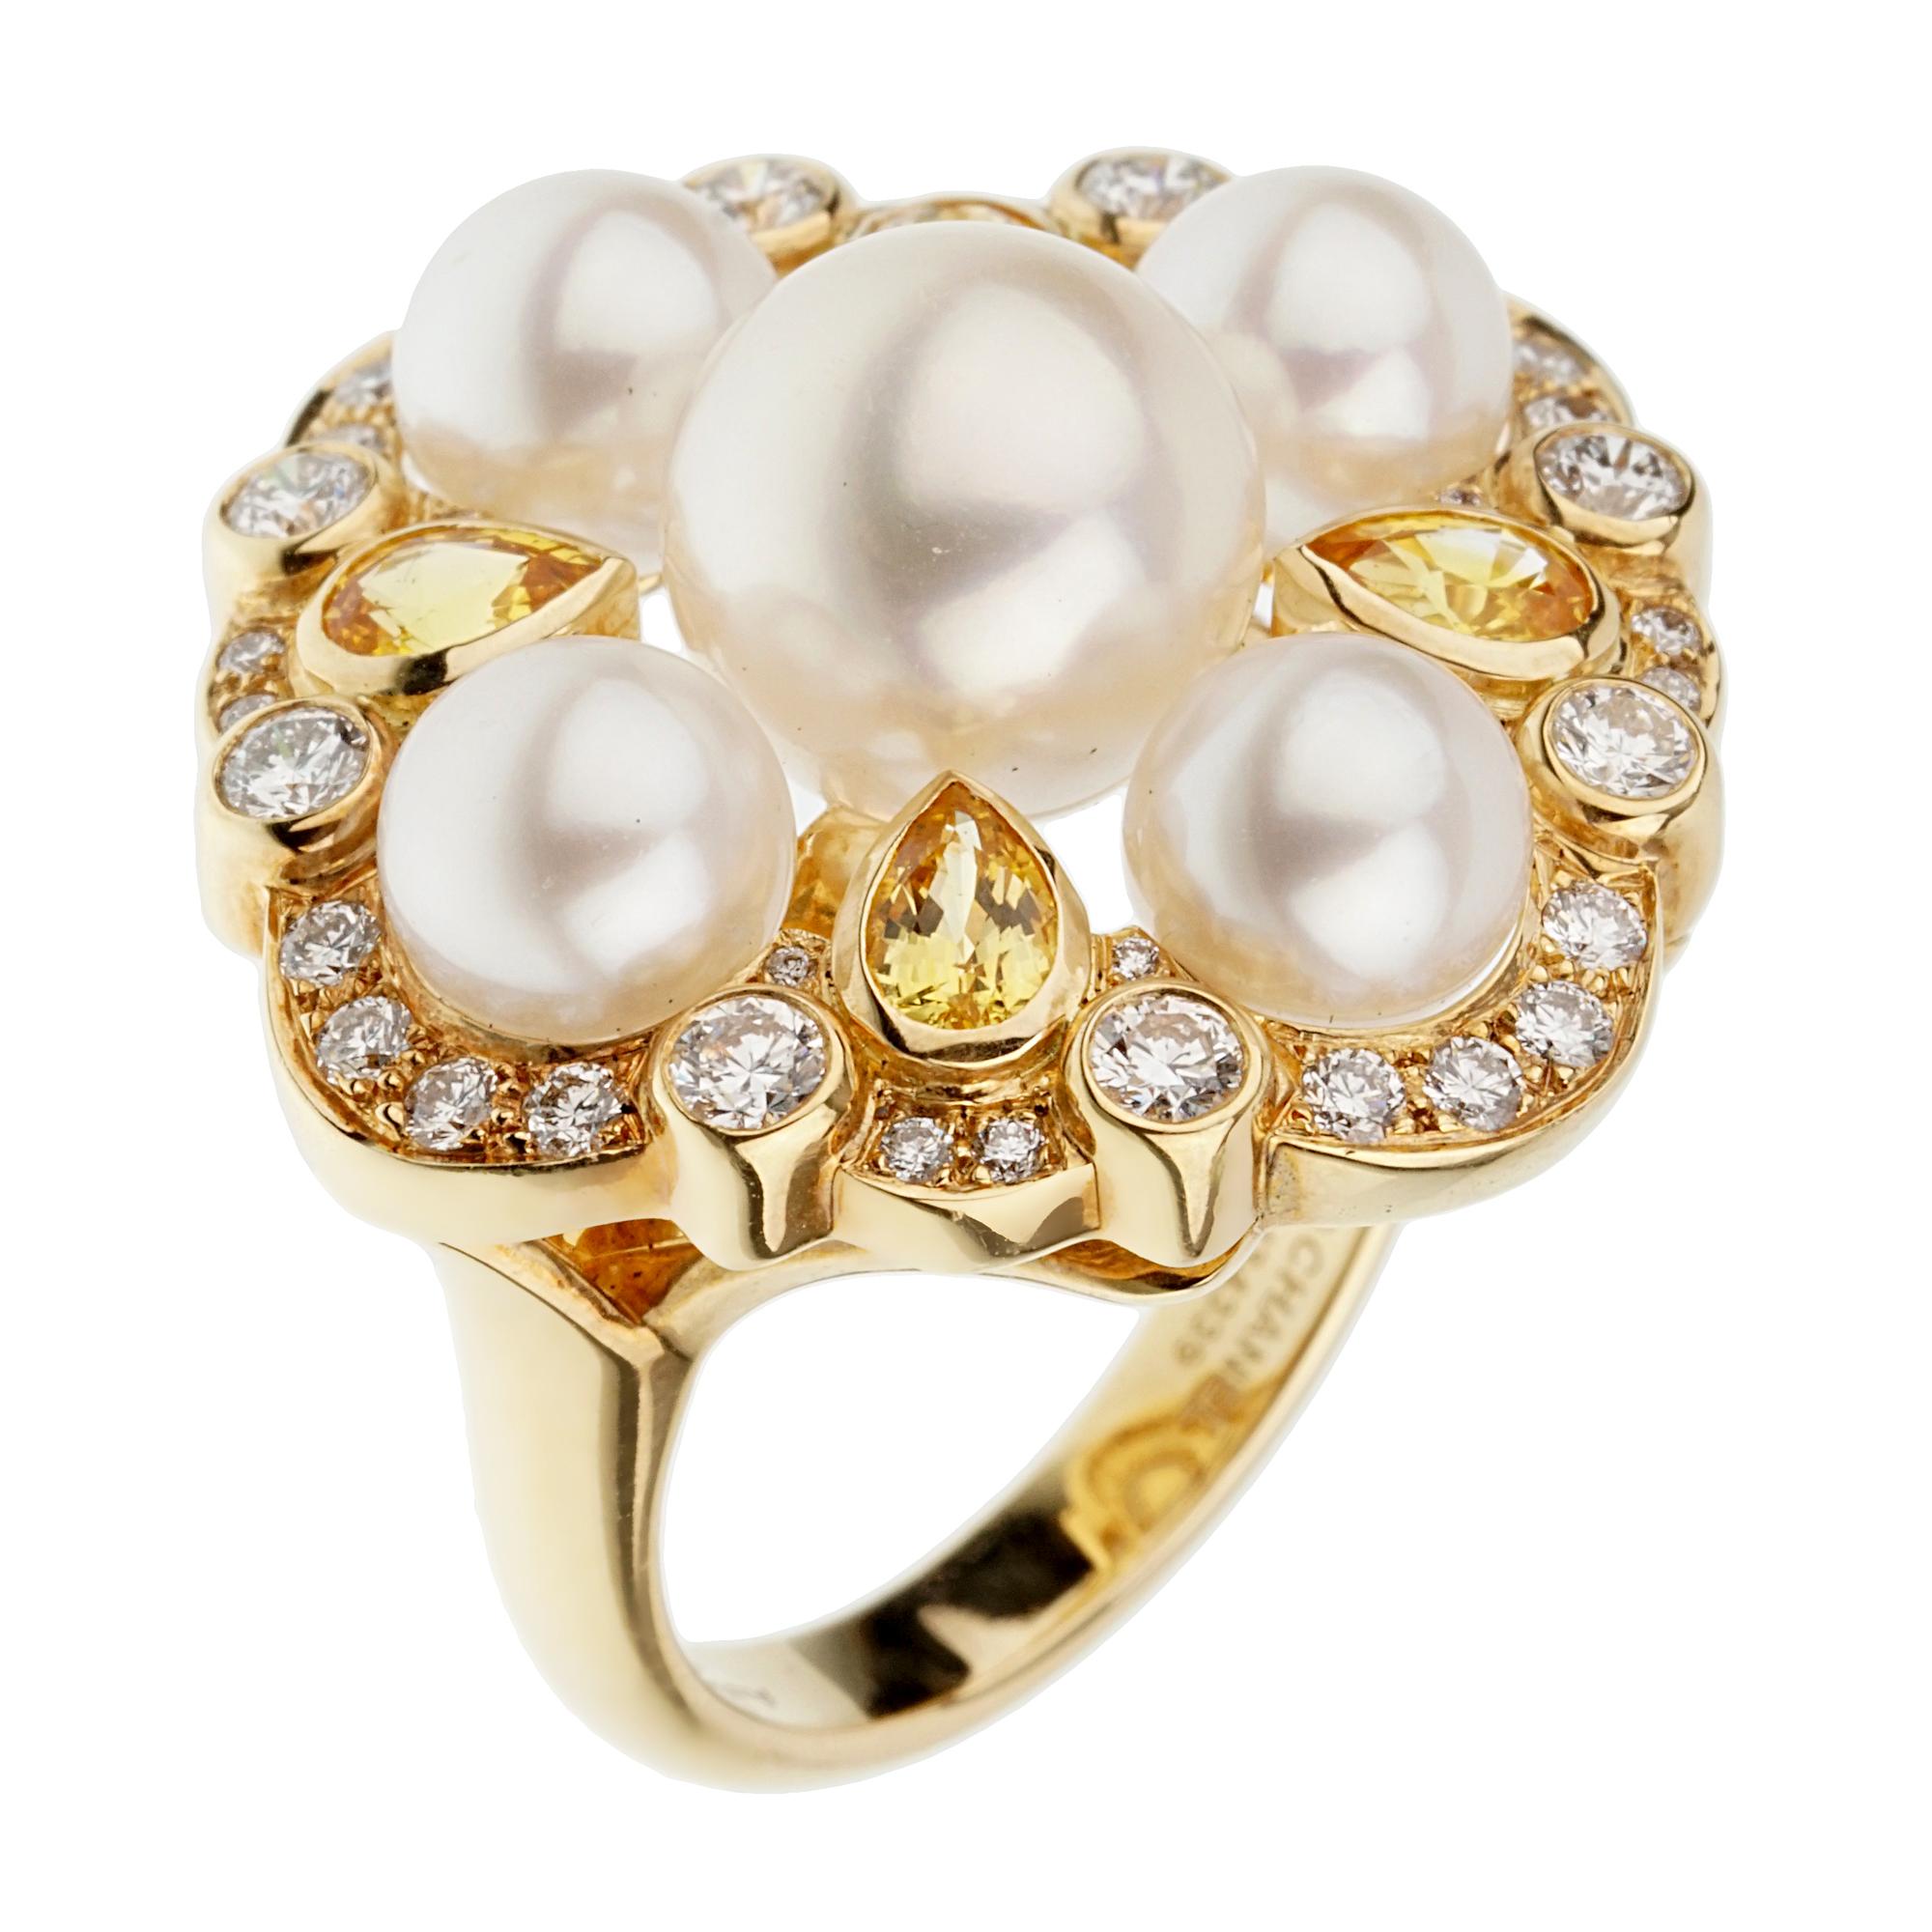 An incredible cocktail ring by Chanel showcasing 5 pearls adorned with 4 pear shaped yellow sapphires and diamond border all set in luxurious 18k yellow gold. The ring measures a size 6 1/2 and can be resized.